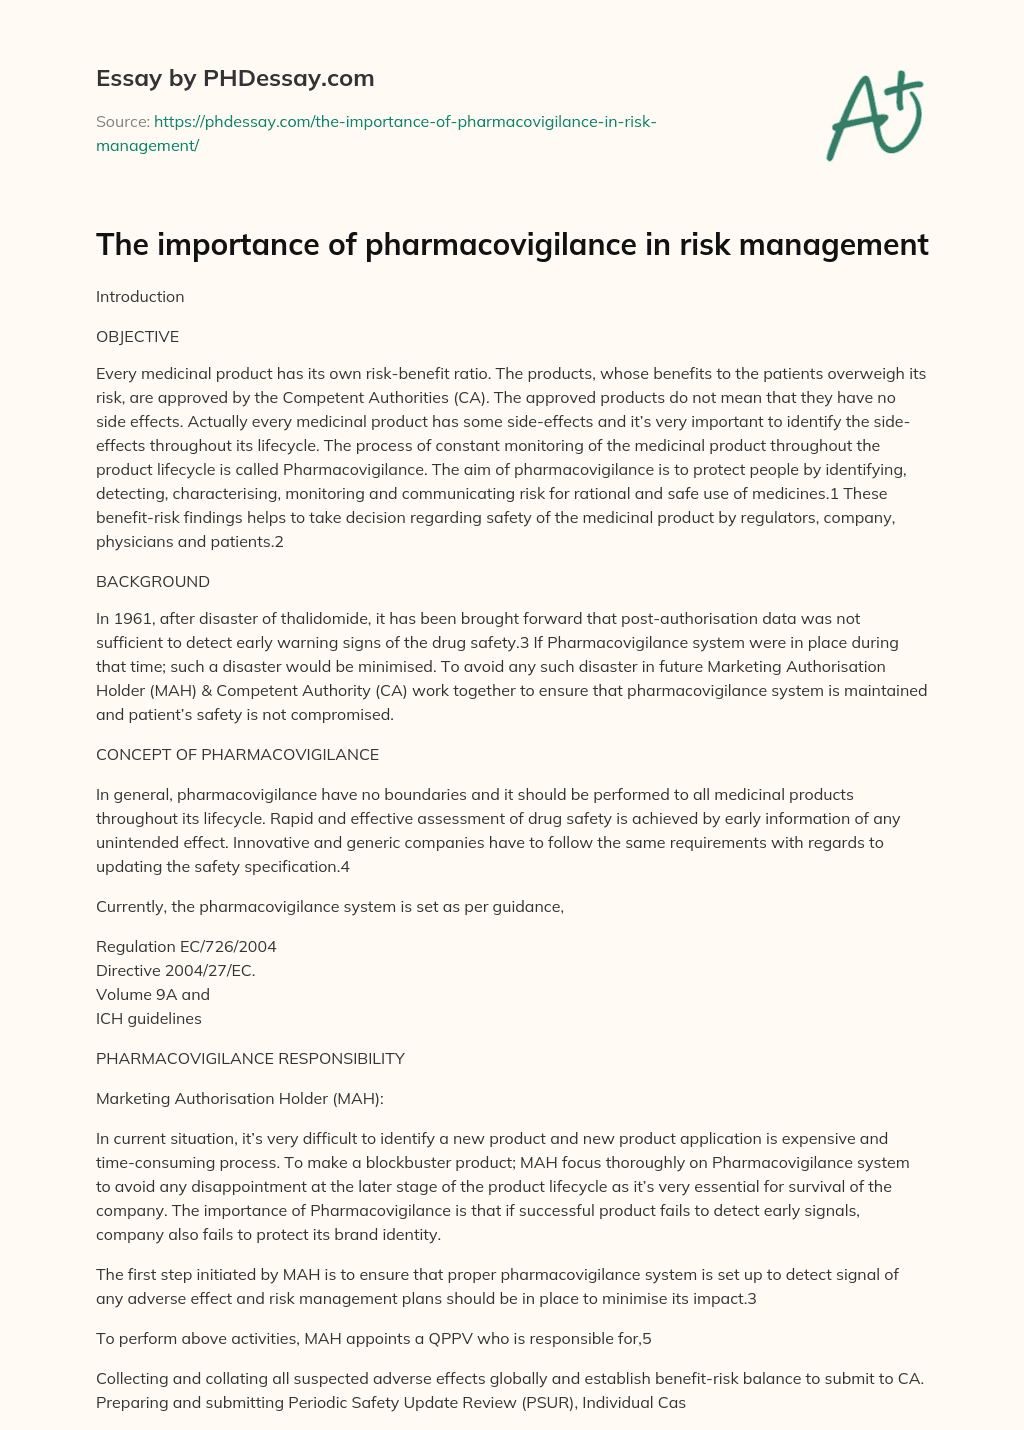 The importance of pharmacovigilance in risk management essay